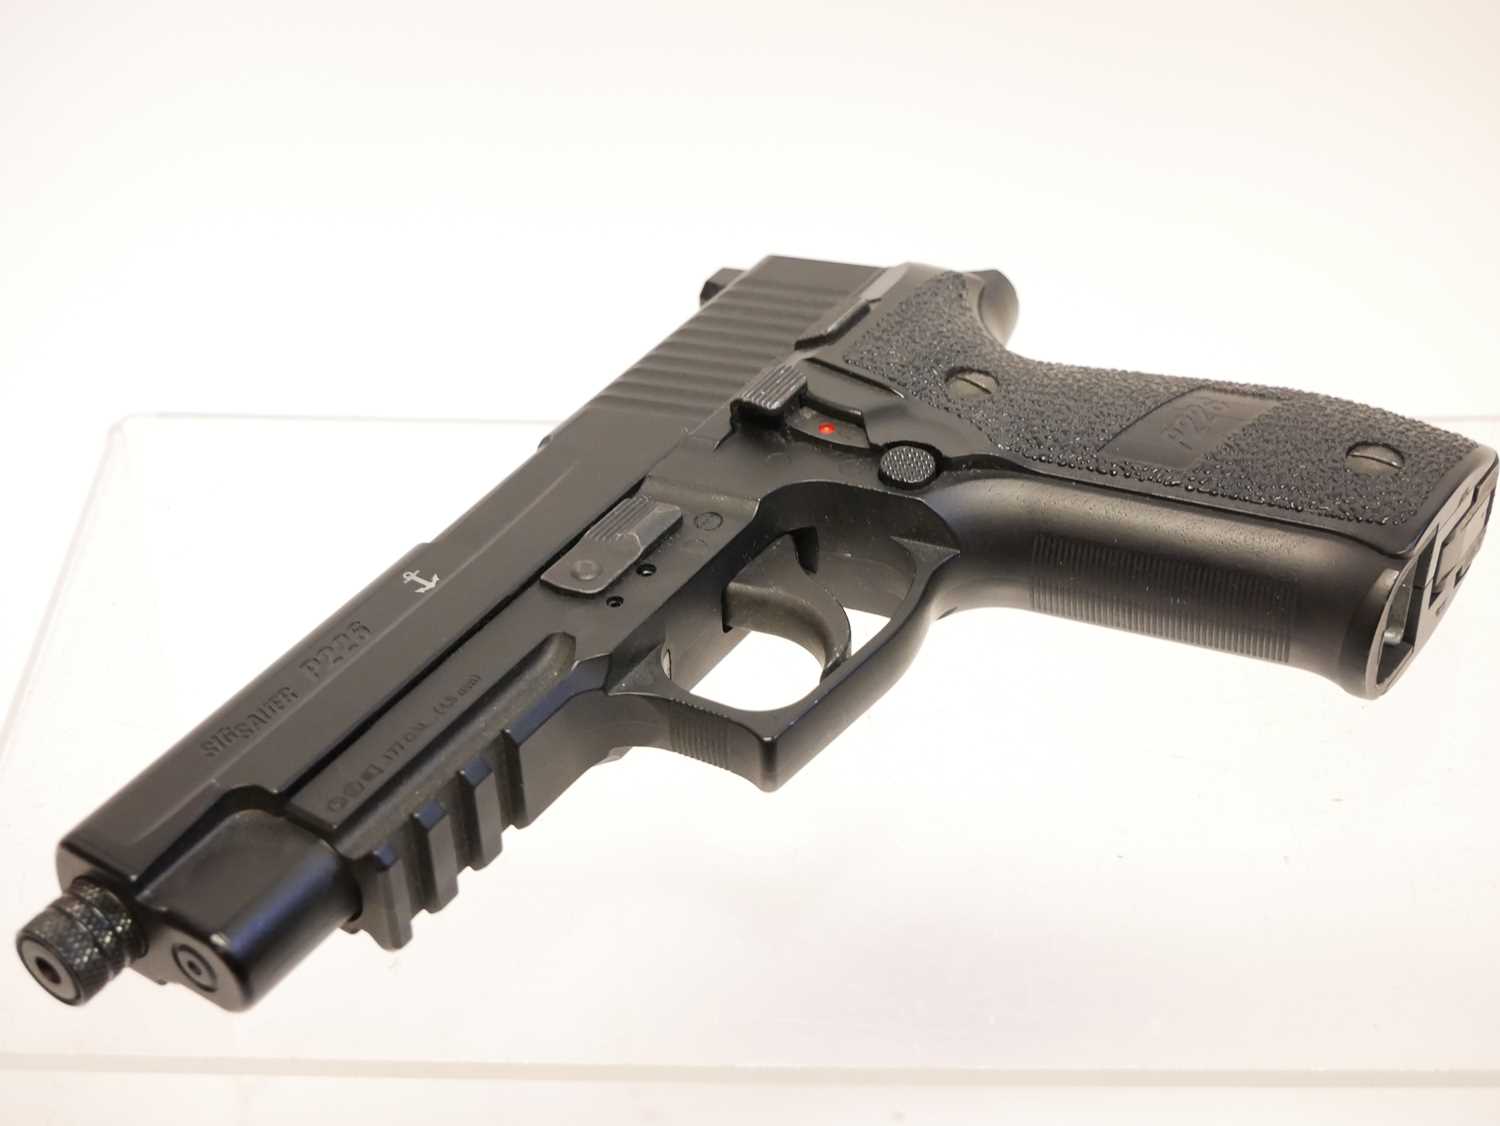 Sig Sauer P226 .177 blowback air pistol serial number 15J04362, with one double-end rotary magazine. - Image 3 of 6